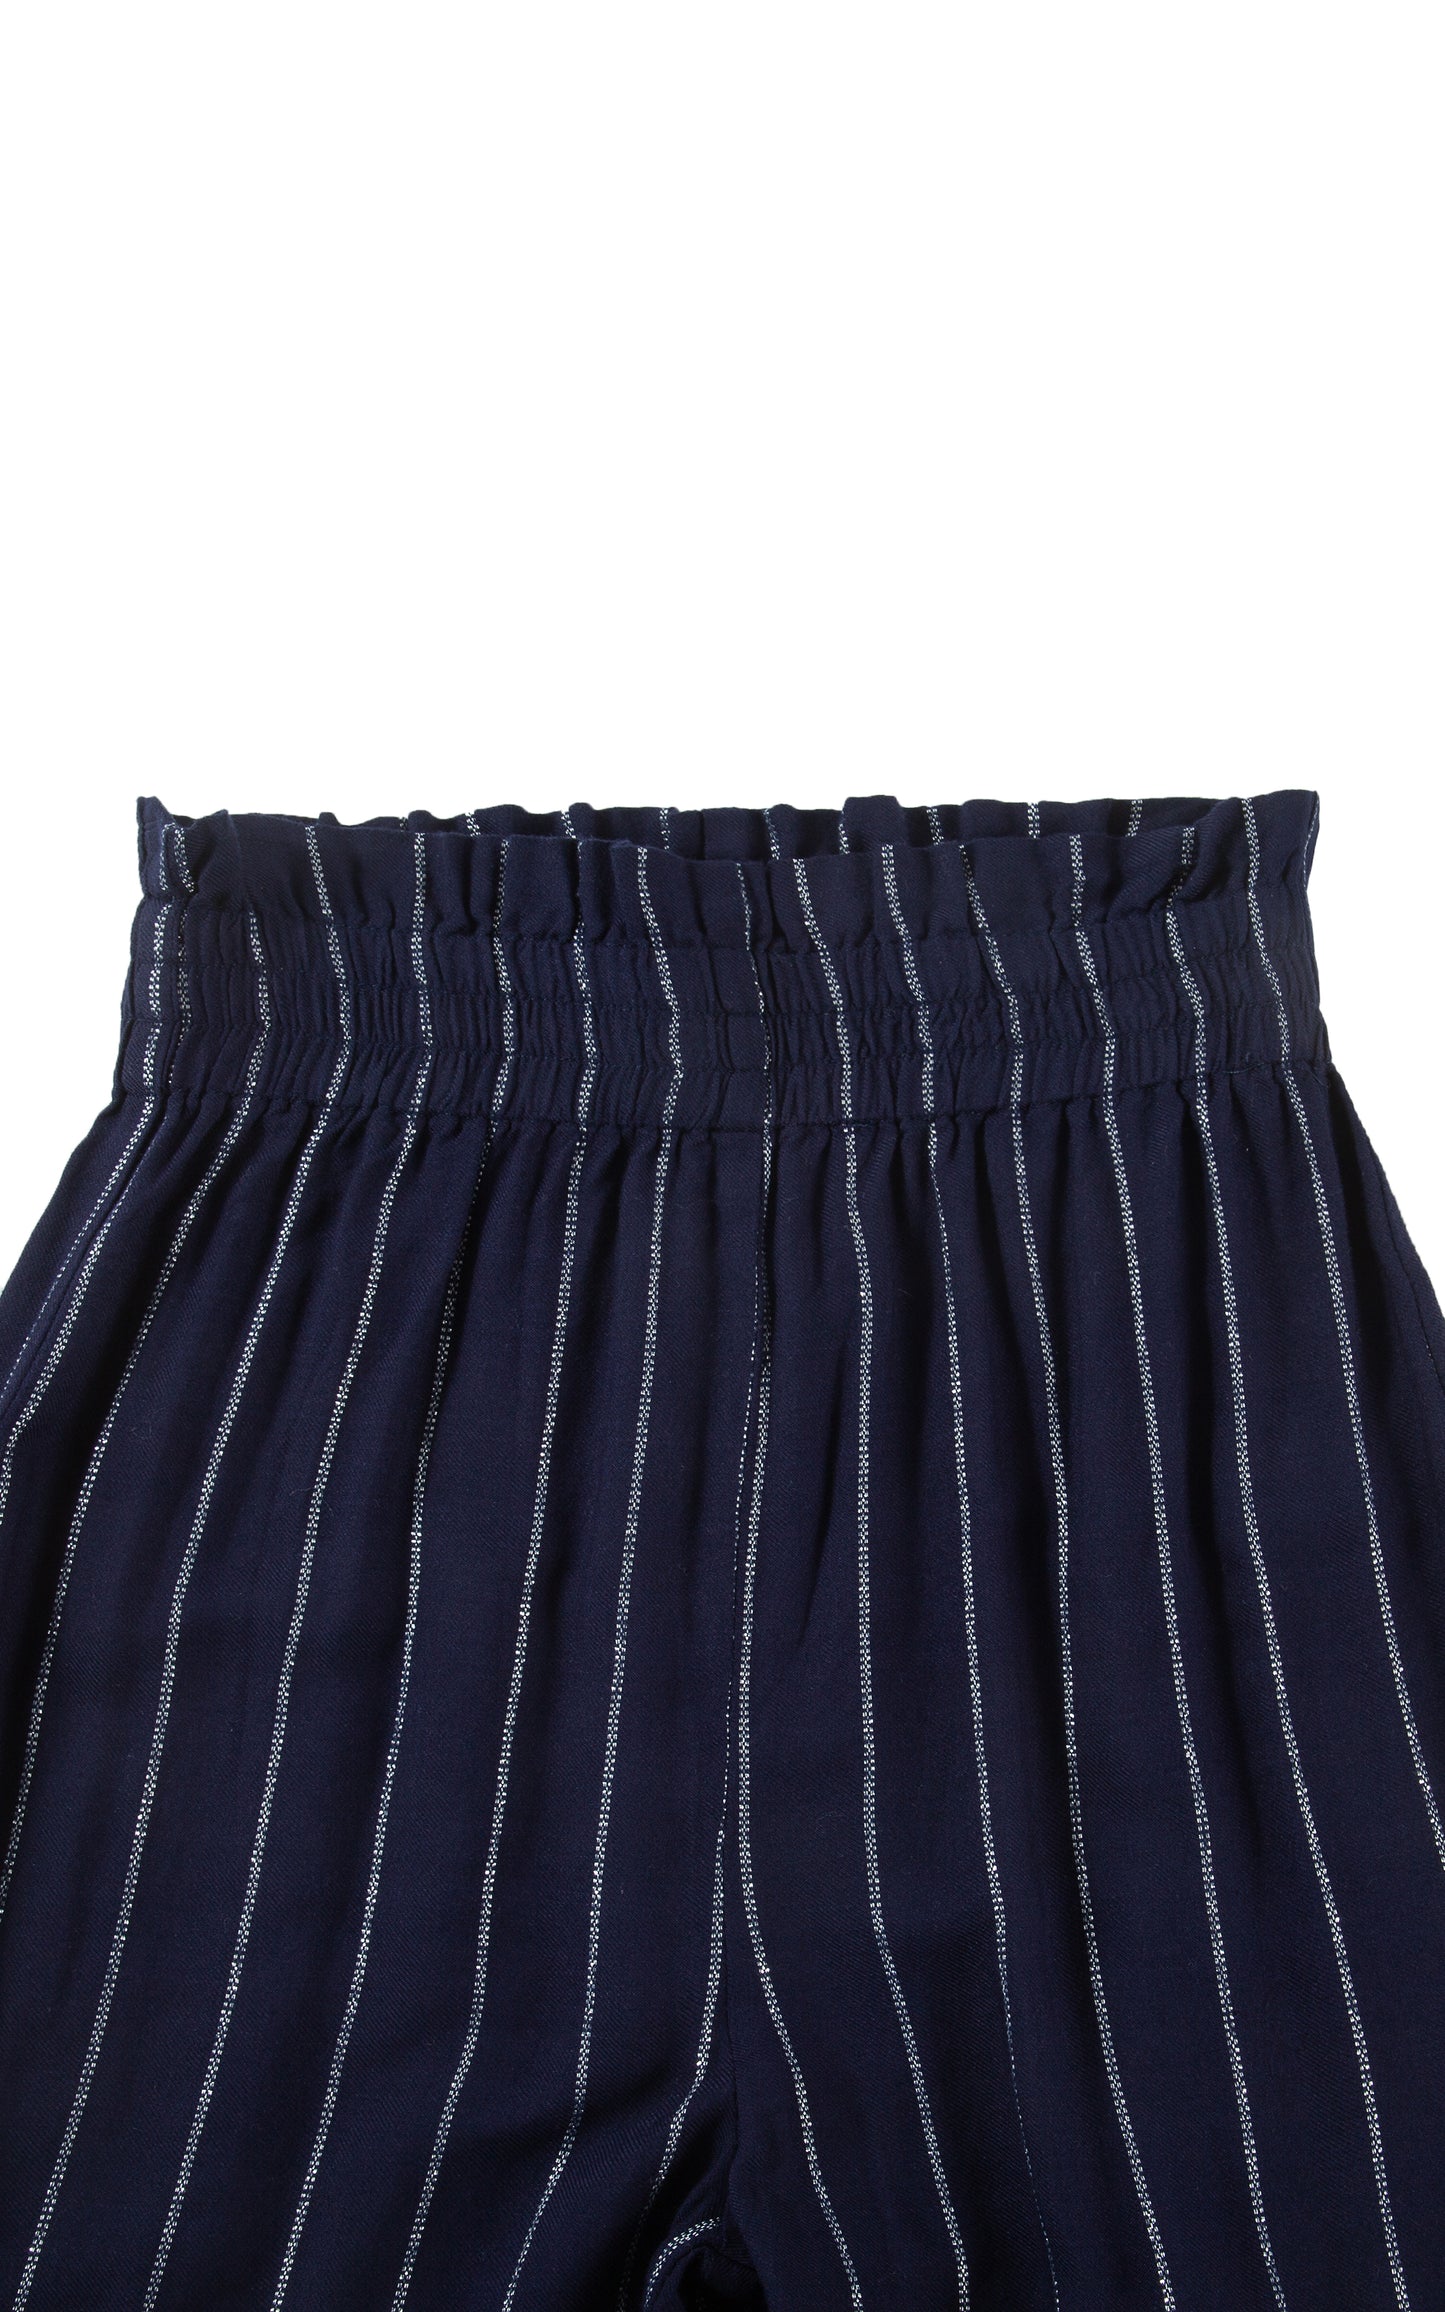 CLOSE UP OF DARK BLUE BAGGY WIDE LEG PANTS WITH SMOCKED WAIST